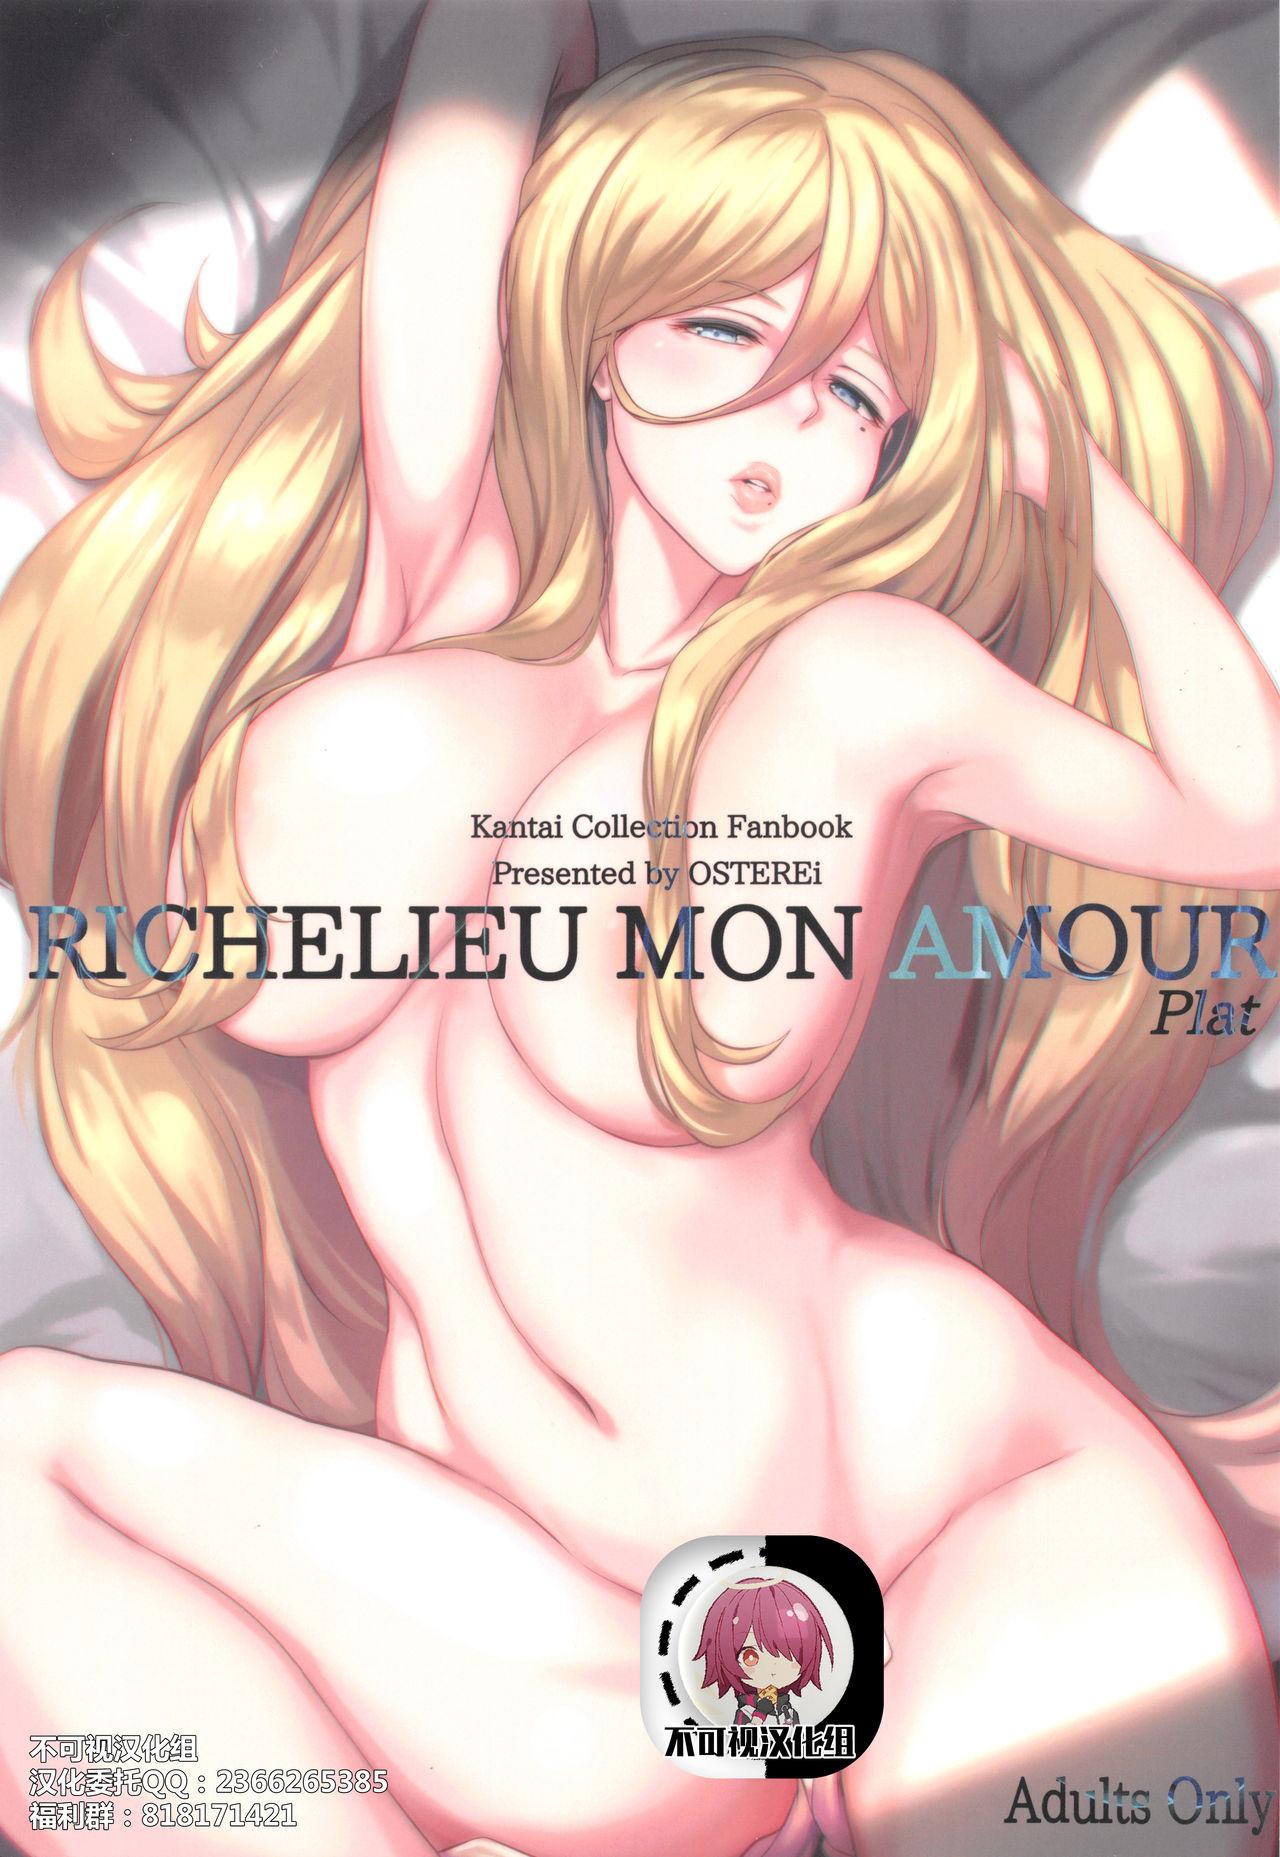 Family Roleplay RICHELIEU MON AMOUR Plat - Kantai collection Stepsiblings - Picture 1